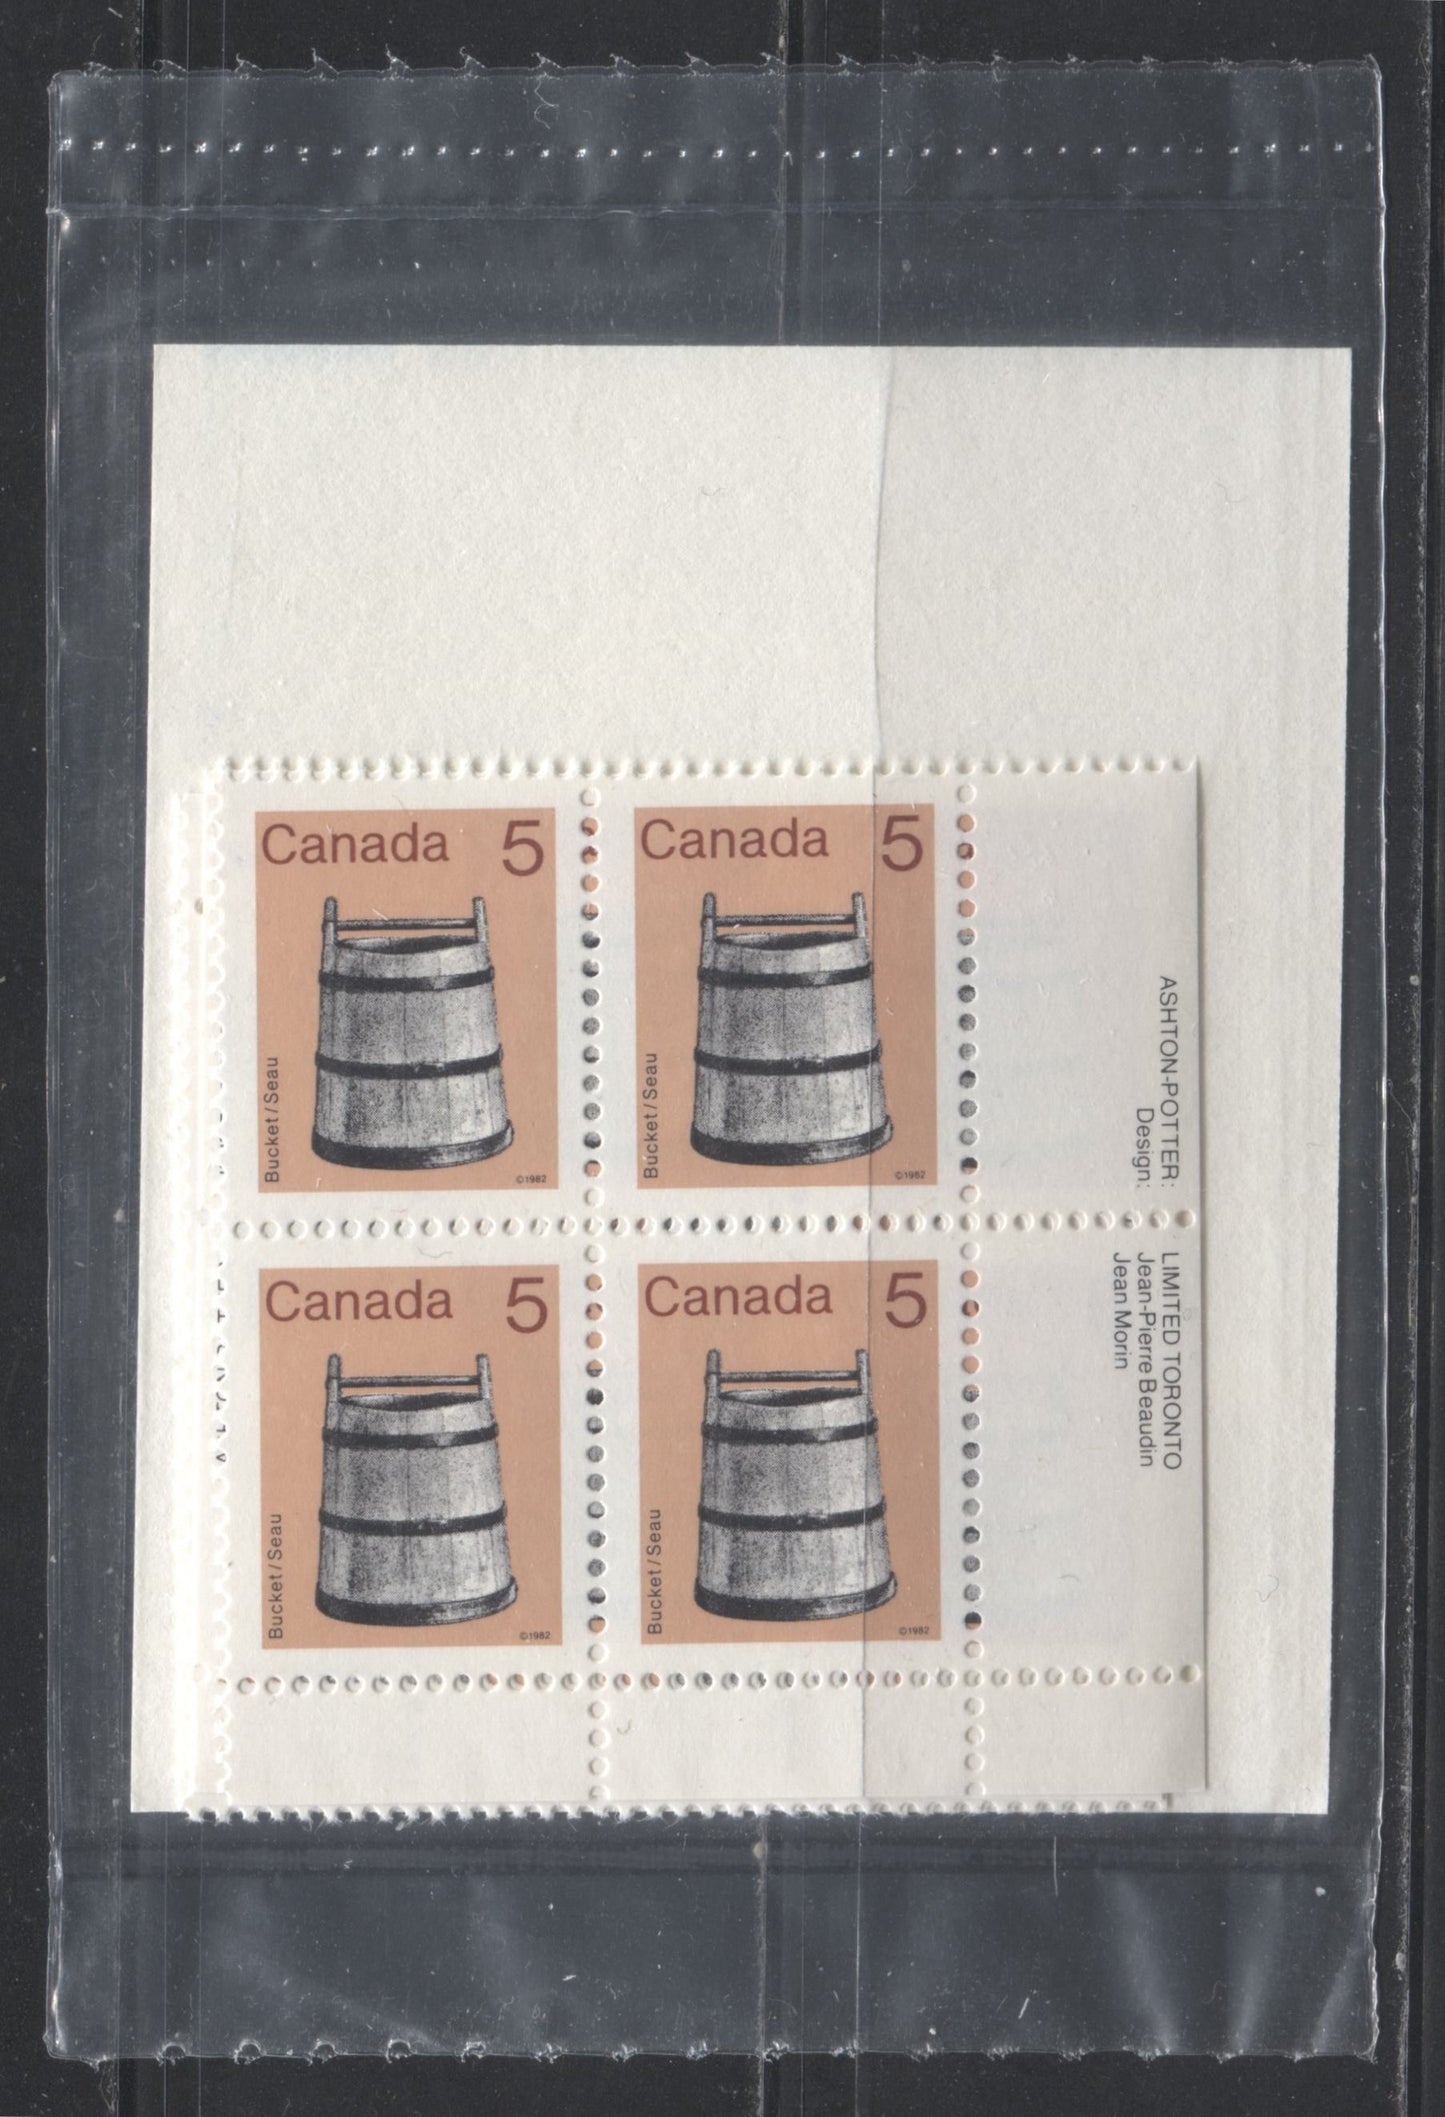 Canada #920 5c Multicolured Bucket, 1982-1987 Artifacts and National Parks Issue. A VFNH Set of Inscription Blocks With A Type 4a Insert Card on DF Stock and Blocks on NF-fl/NF-fl Abitibi Paper